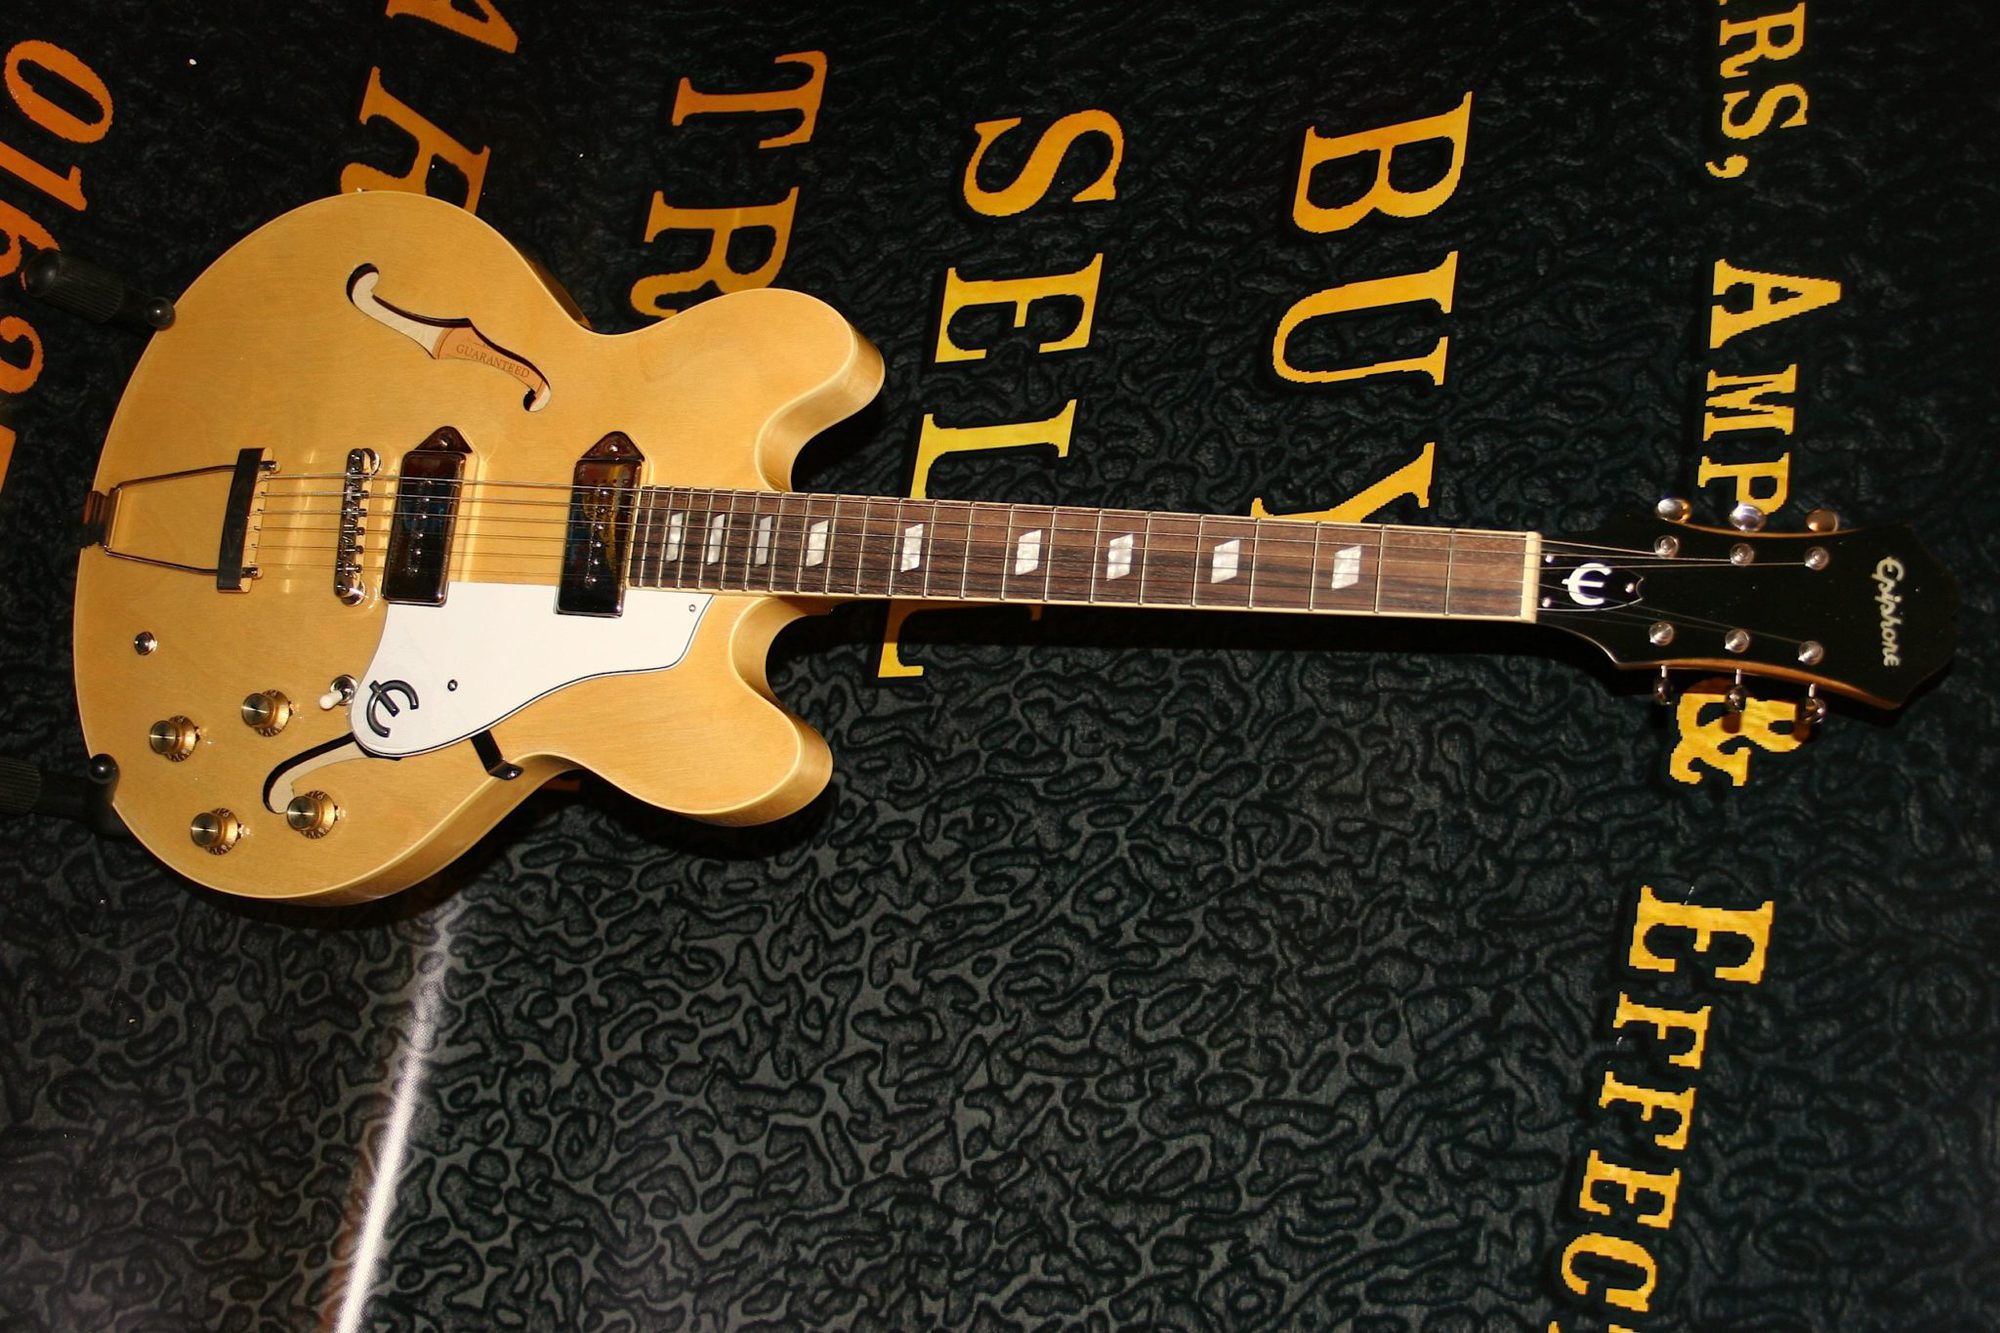 is the epiphone casino a quality guitar